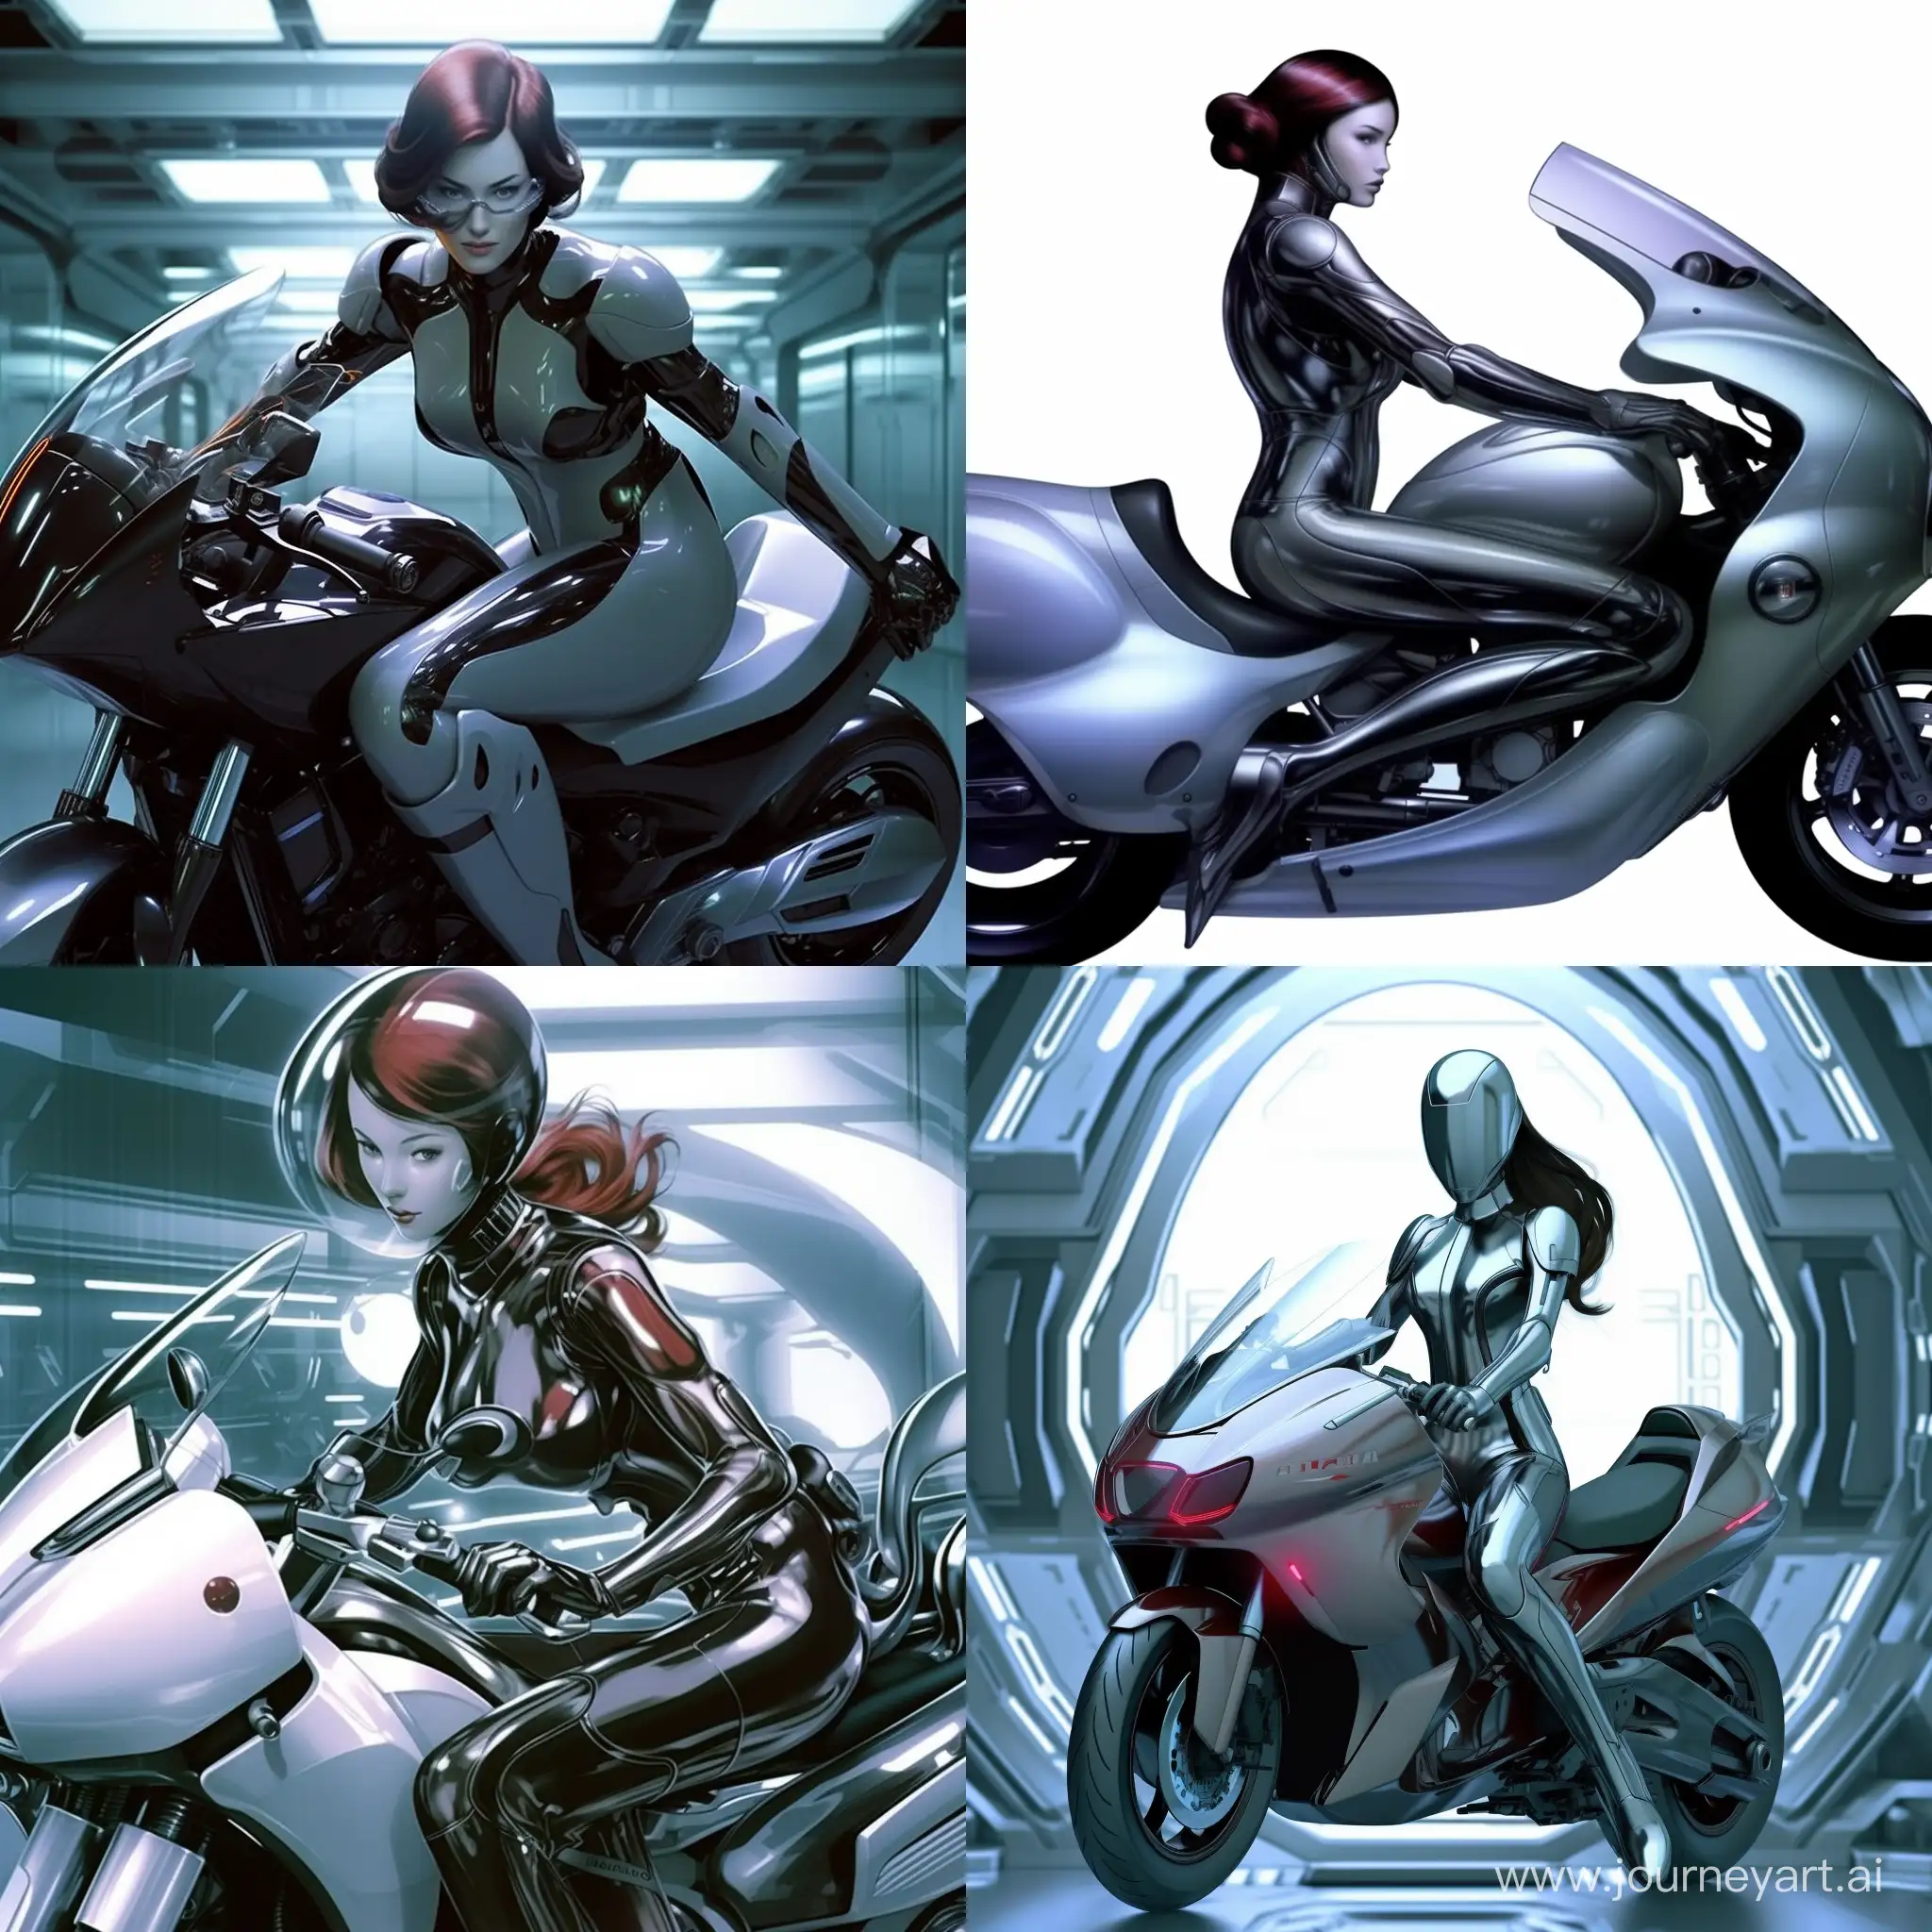 Futuristic-Japanese-Tech-Woman-Riding-Futuristic-Motorcycle-in-Latex-Suit